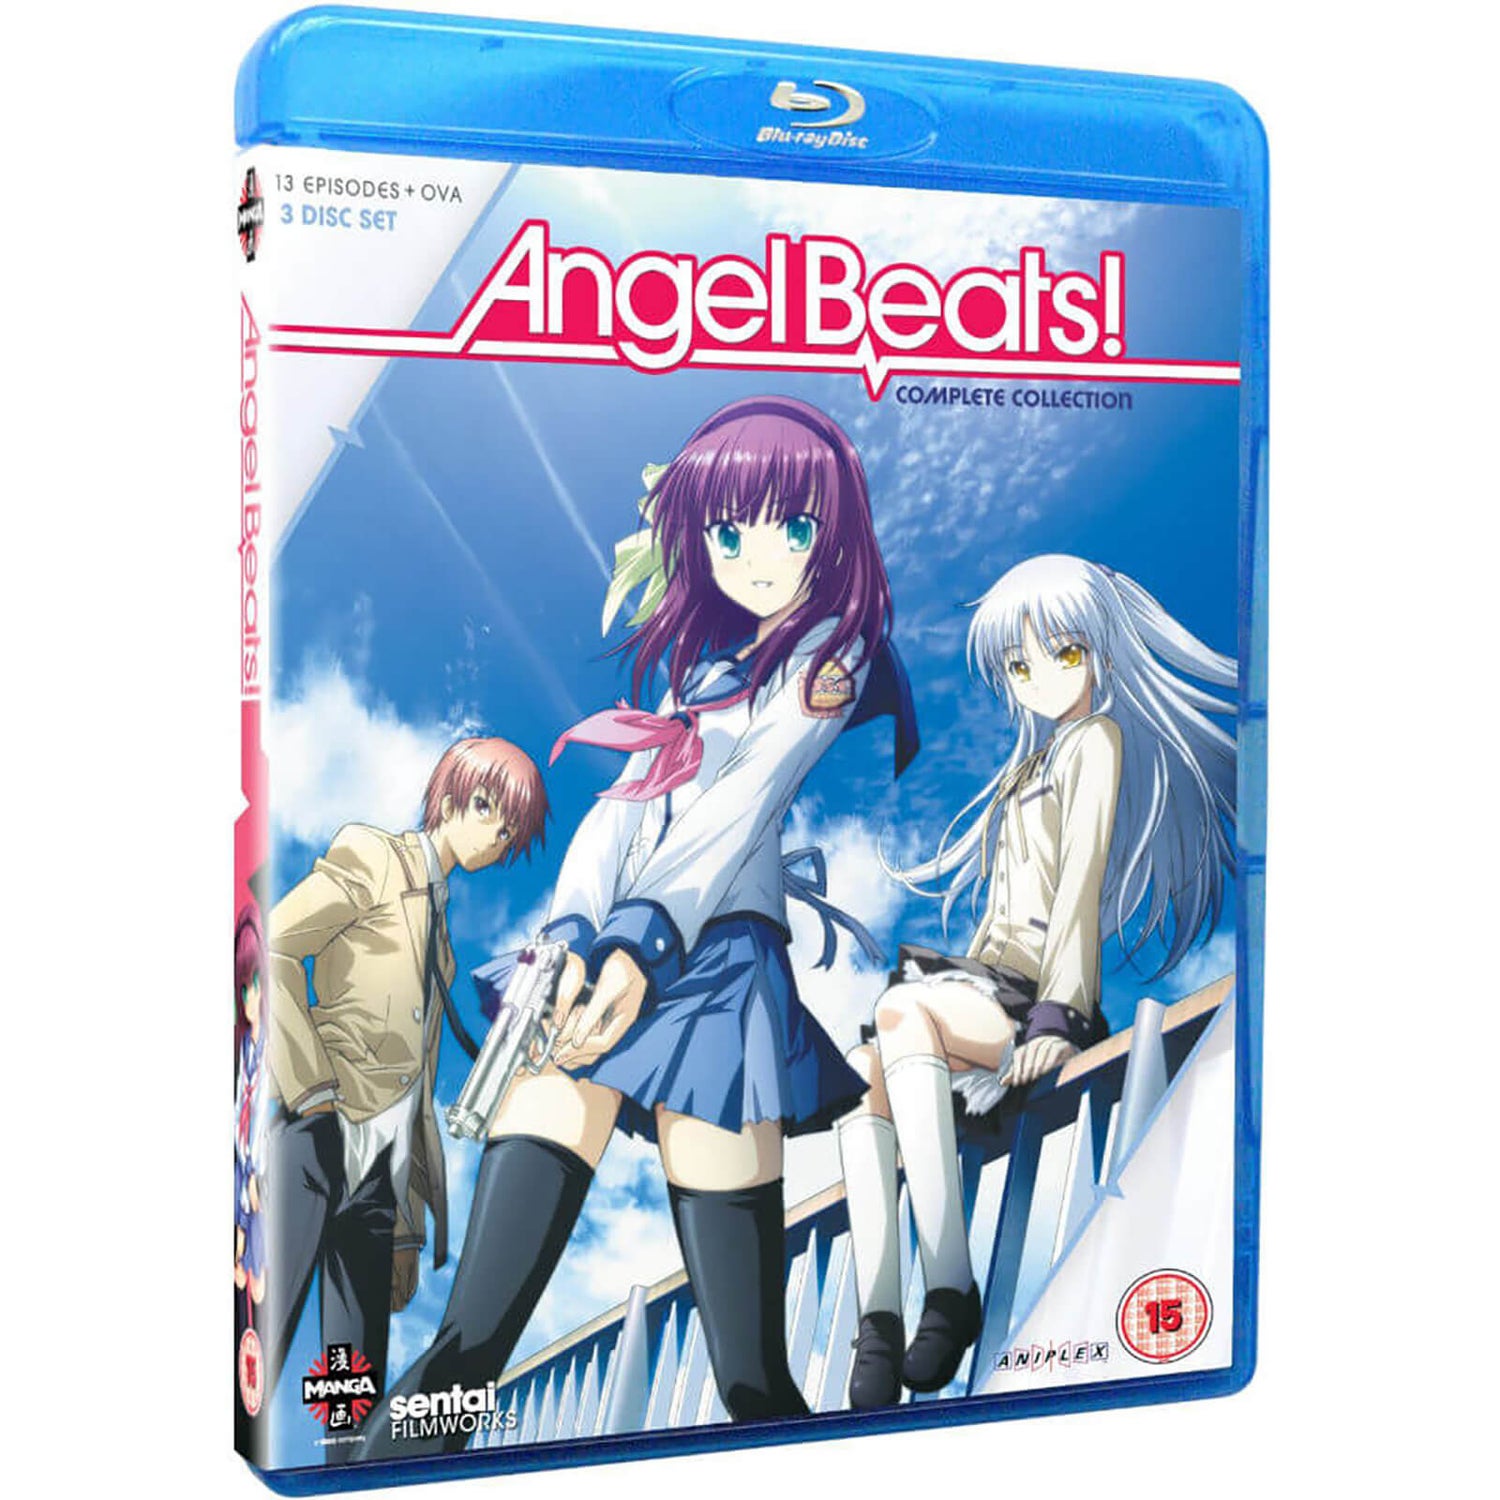  Angels of Death: The Complete Series [Blu-ray